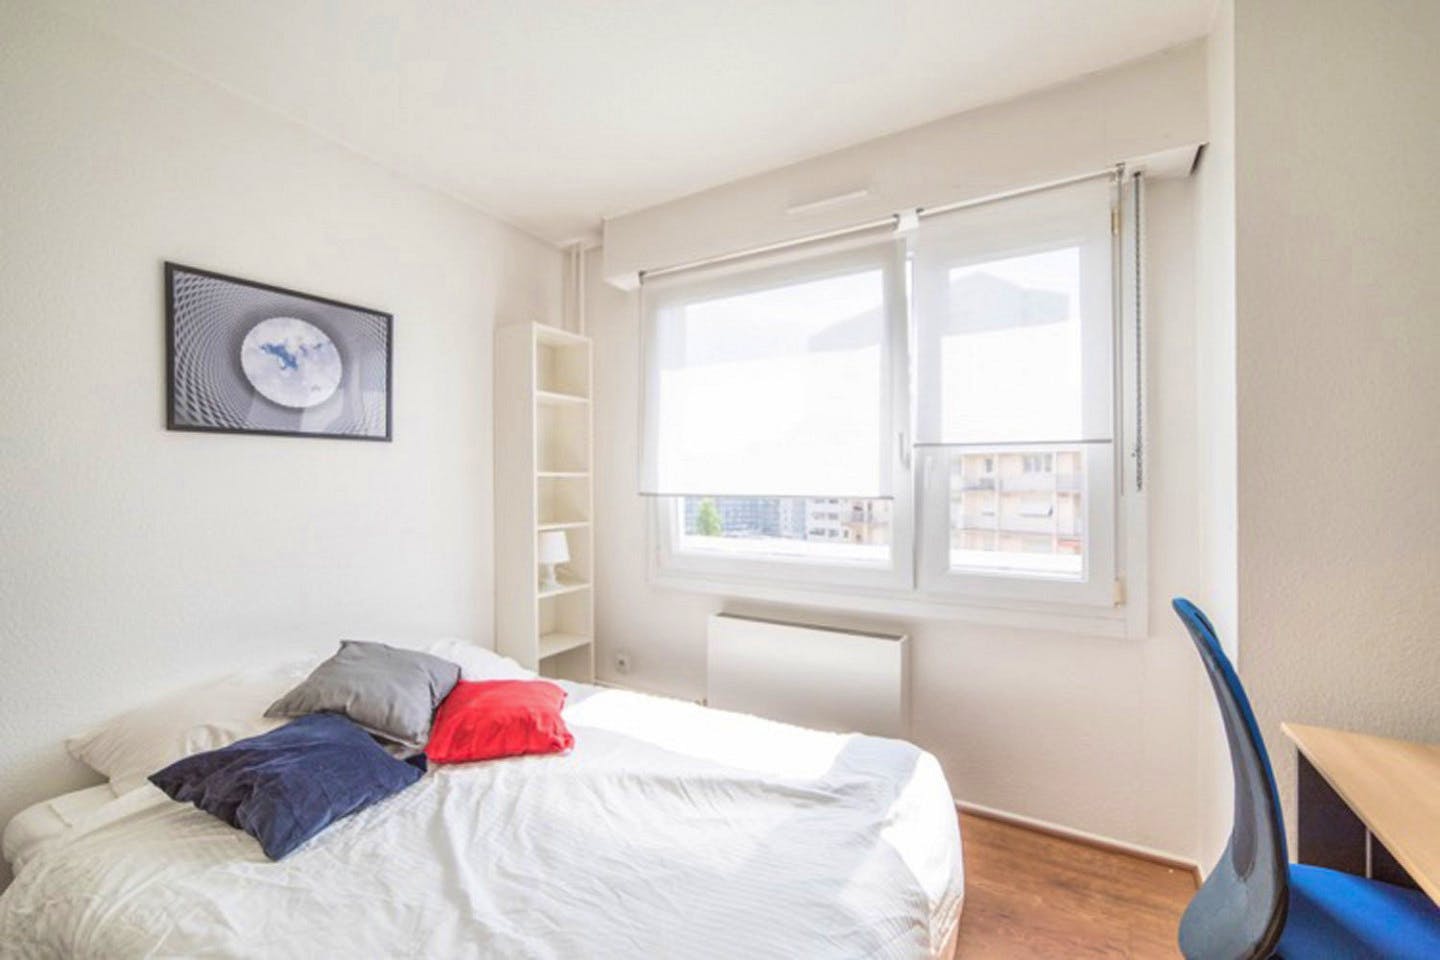 Apartment located near the University of Strasbourg